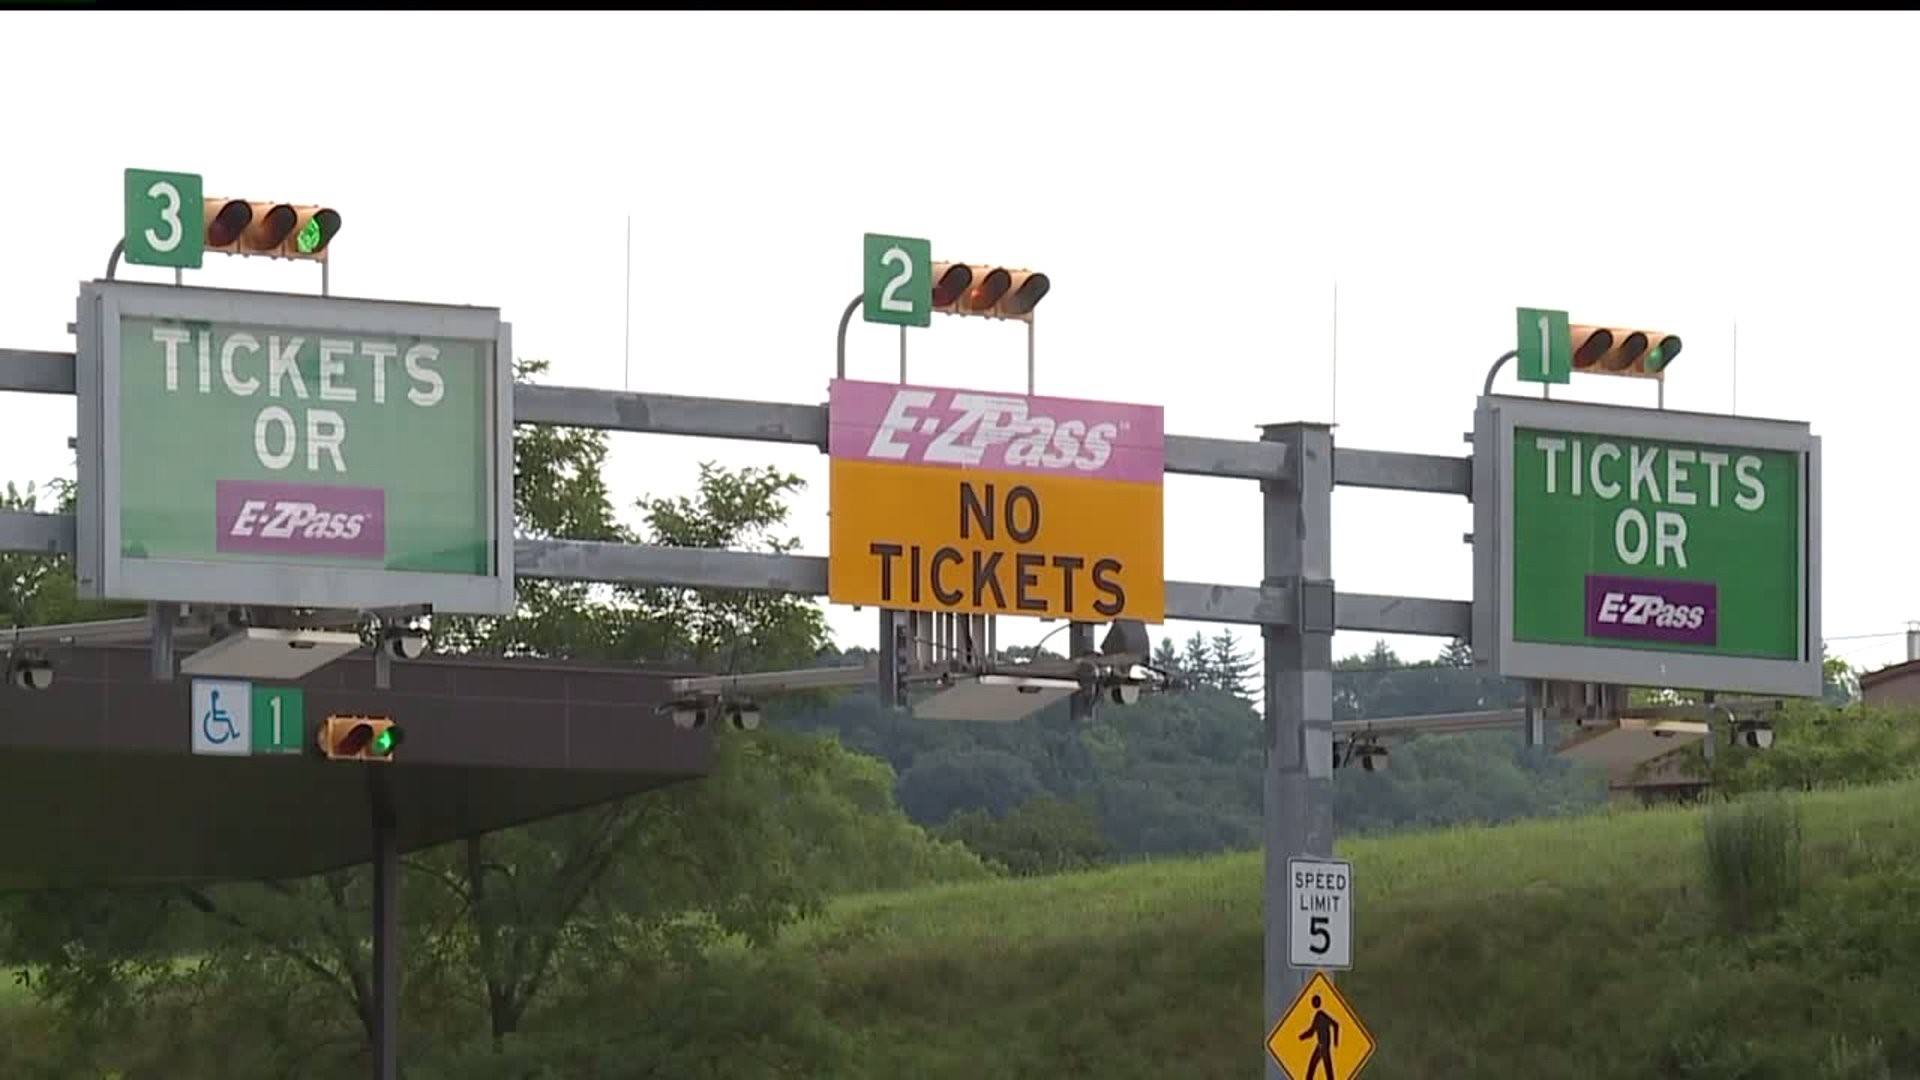 PA Turnpike Commission approves six percent toll increase for 2020